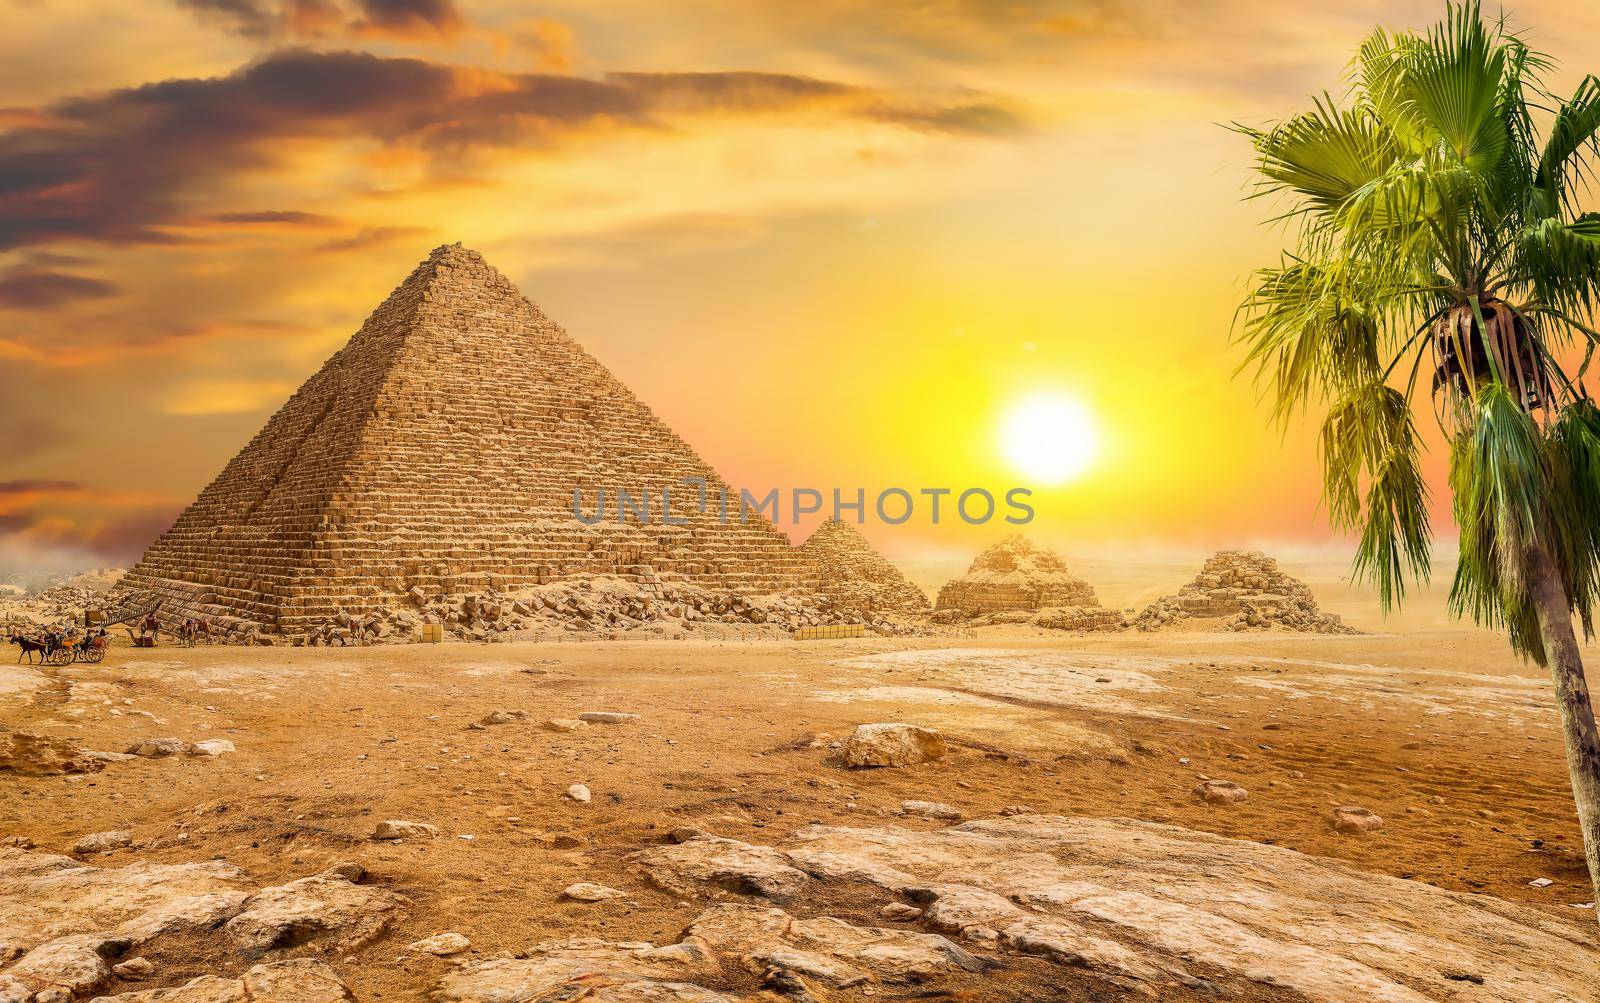 Pyramids and sun by Givaga